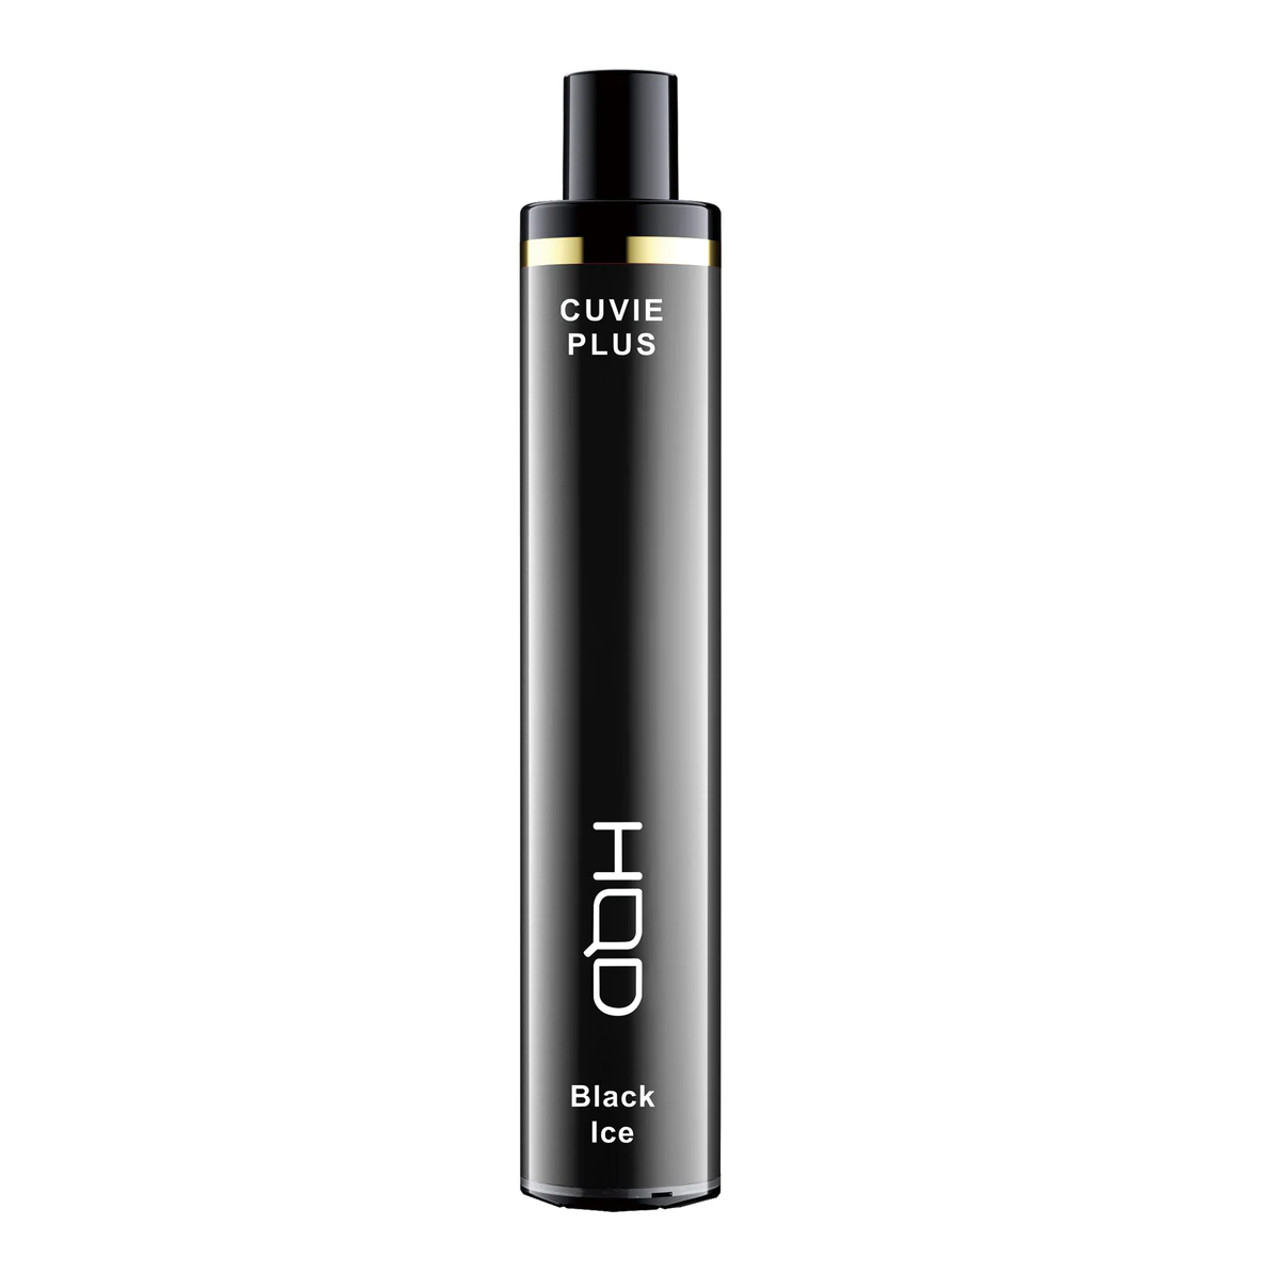 Black Ice Bliss: The Unmatched Features of HQD Cuvie Plus 1200 Puffs